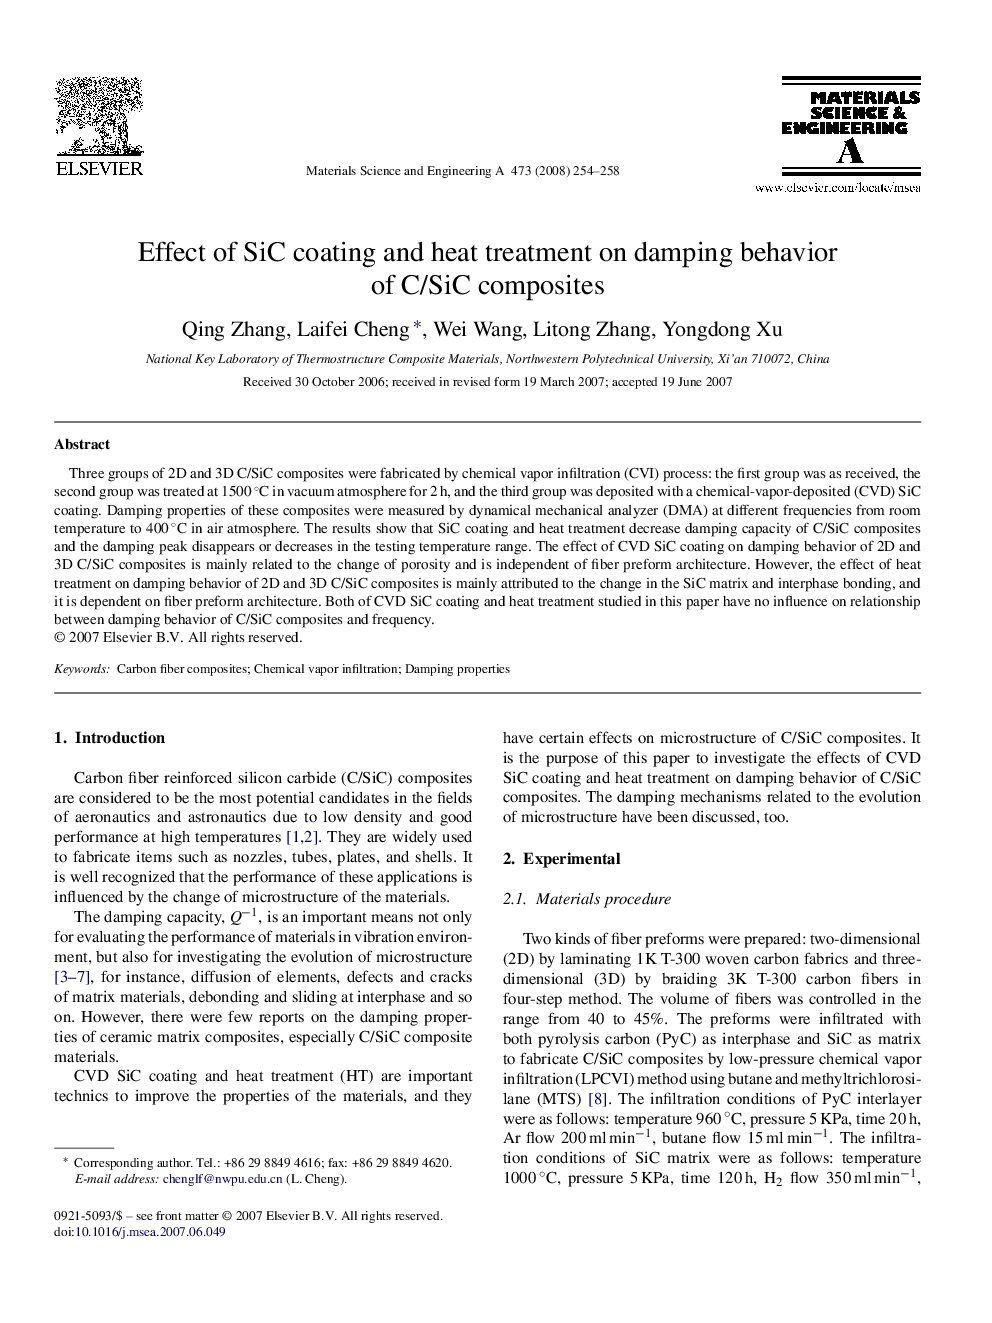 Effect of SiC coating and heat treatment on damping behavior of C/SiC composites